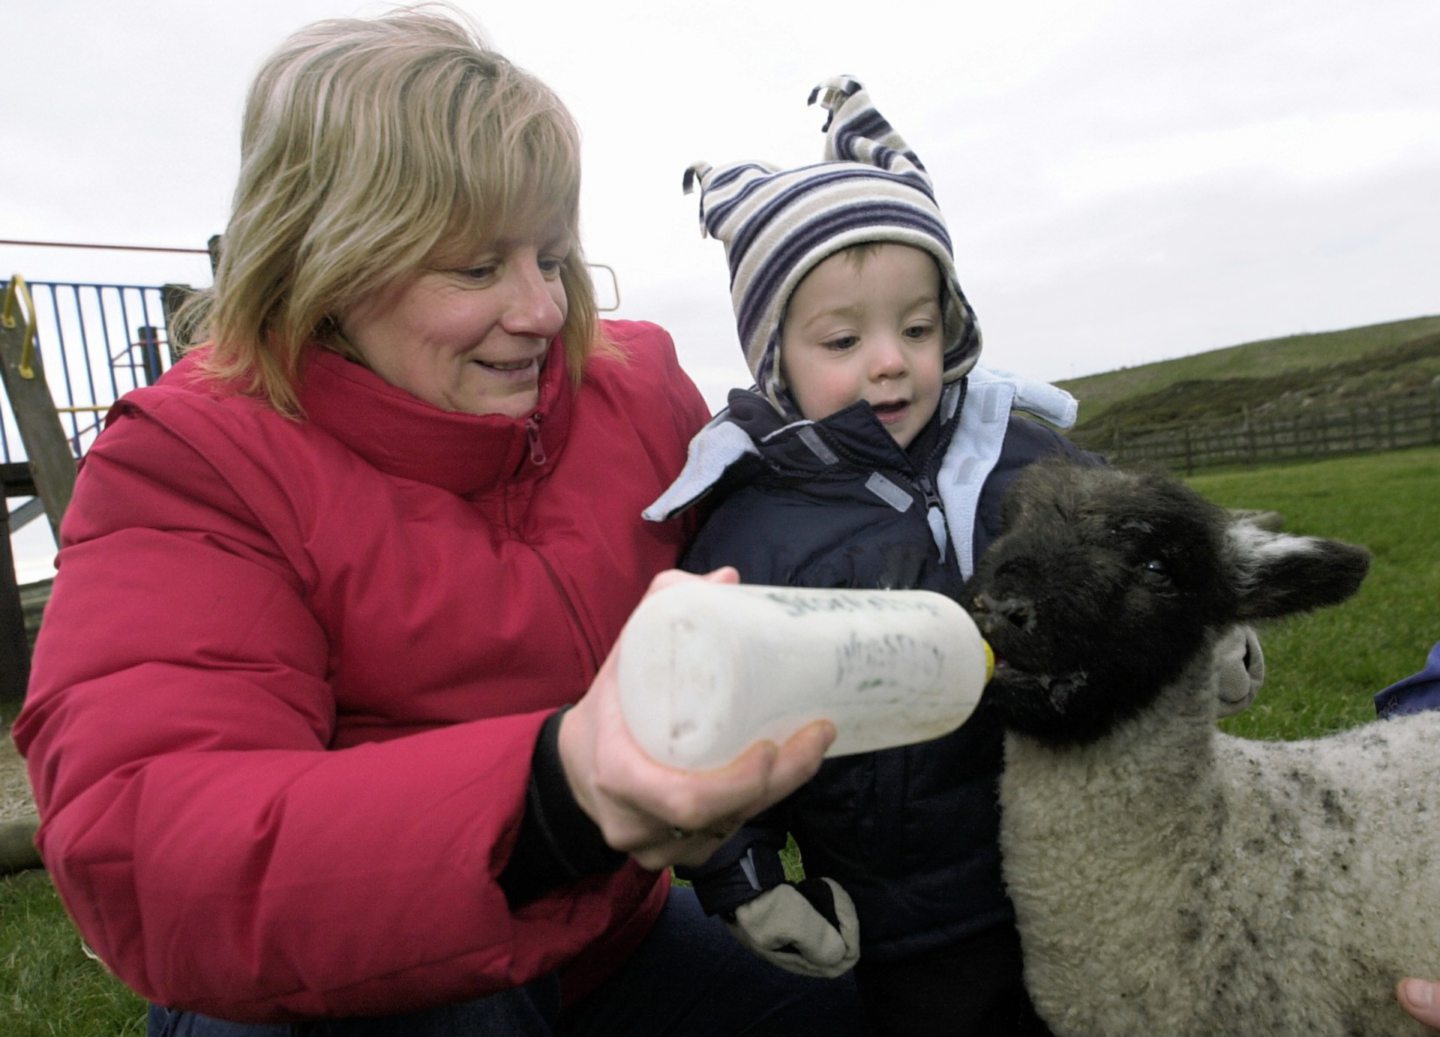 Young boy feeding a newborn lamb with his grandmother at Aberdeen's Doonies Farm in 2003.